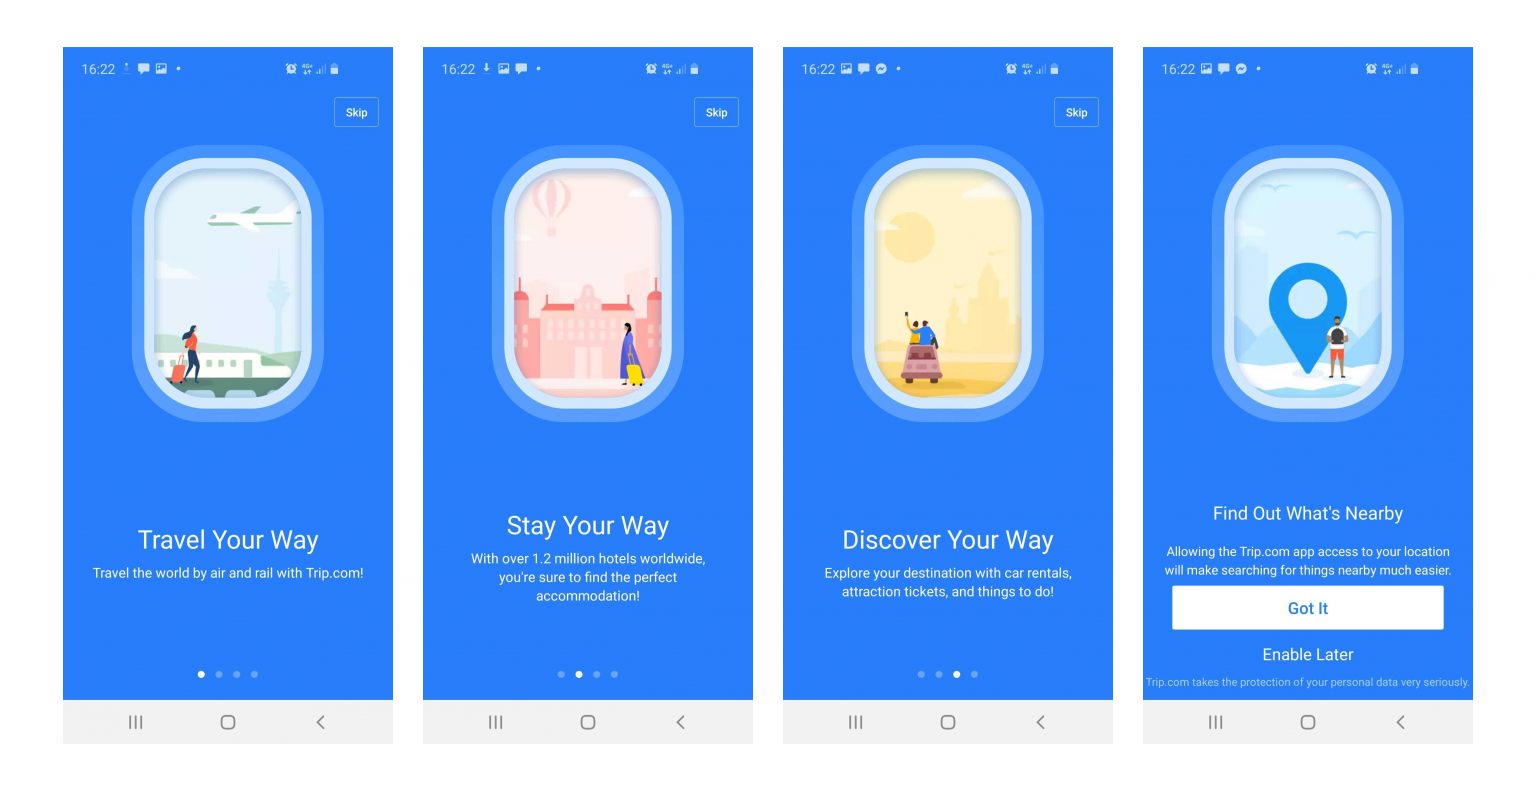  Onboarding: best move for user retention in mobile apps 